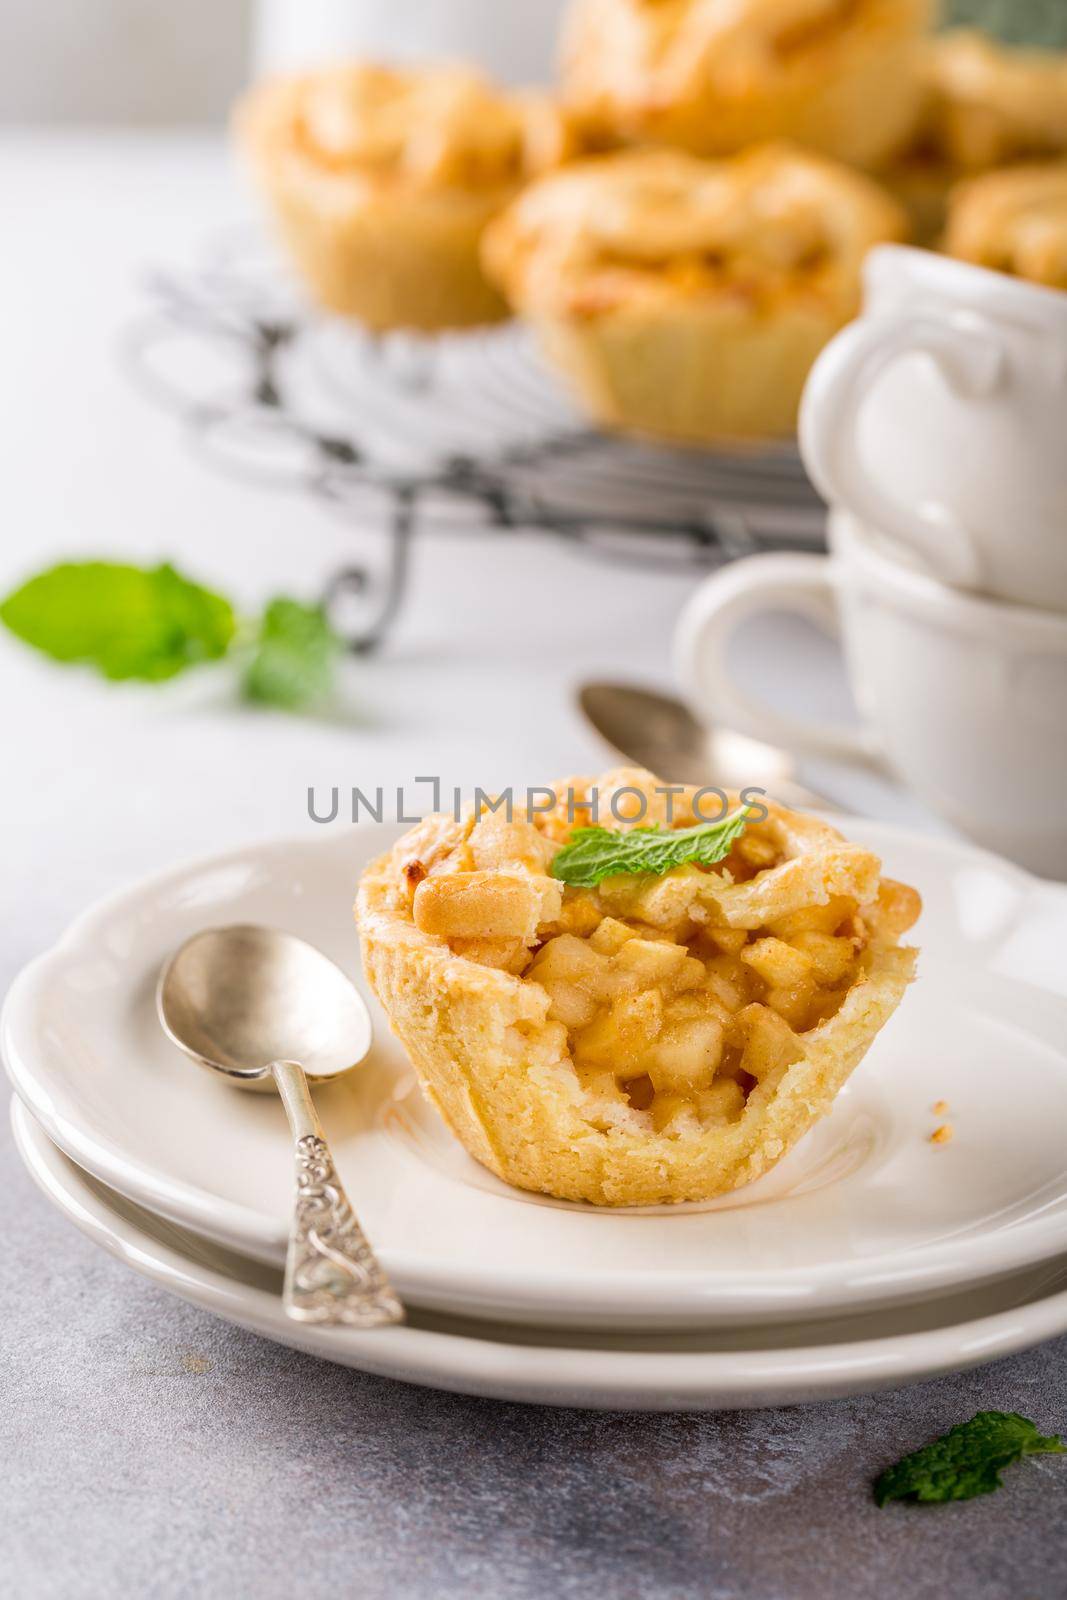 Homemade mini apple pies on white plates decorated with mint leaves on light concrete background. Healthy food concept.